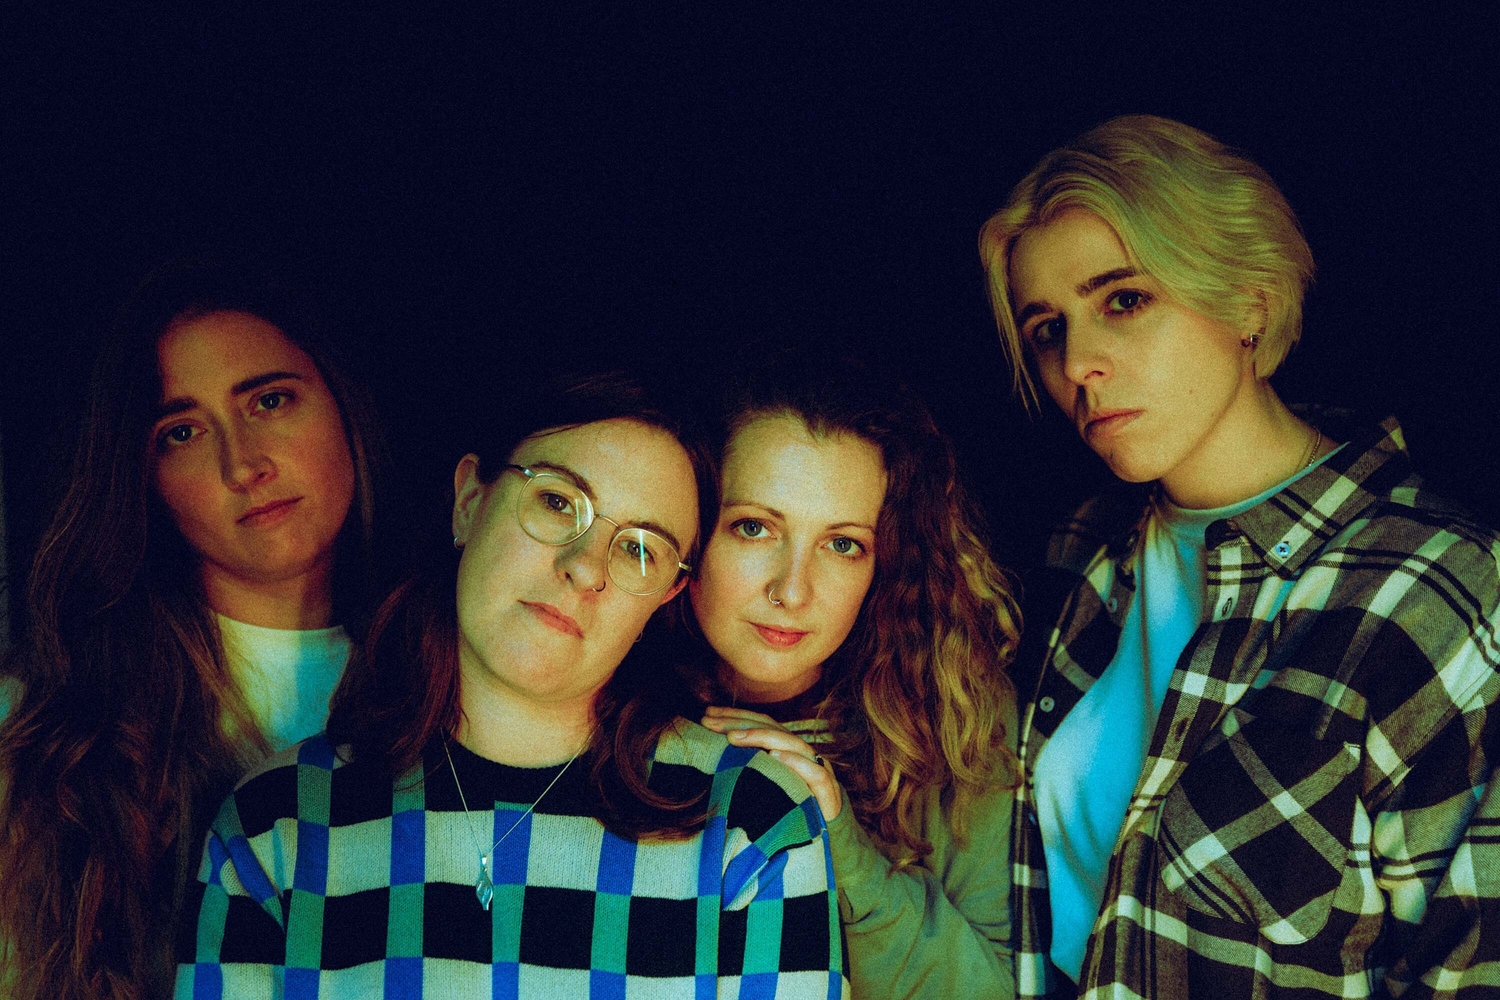 Pillow Queens: “This album is very much about stages of grief - each stage is worthwhile and important in its own right, even if the feeling is irrational”